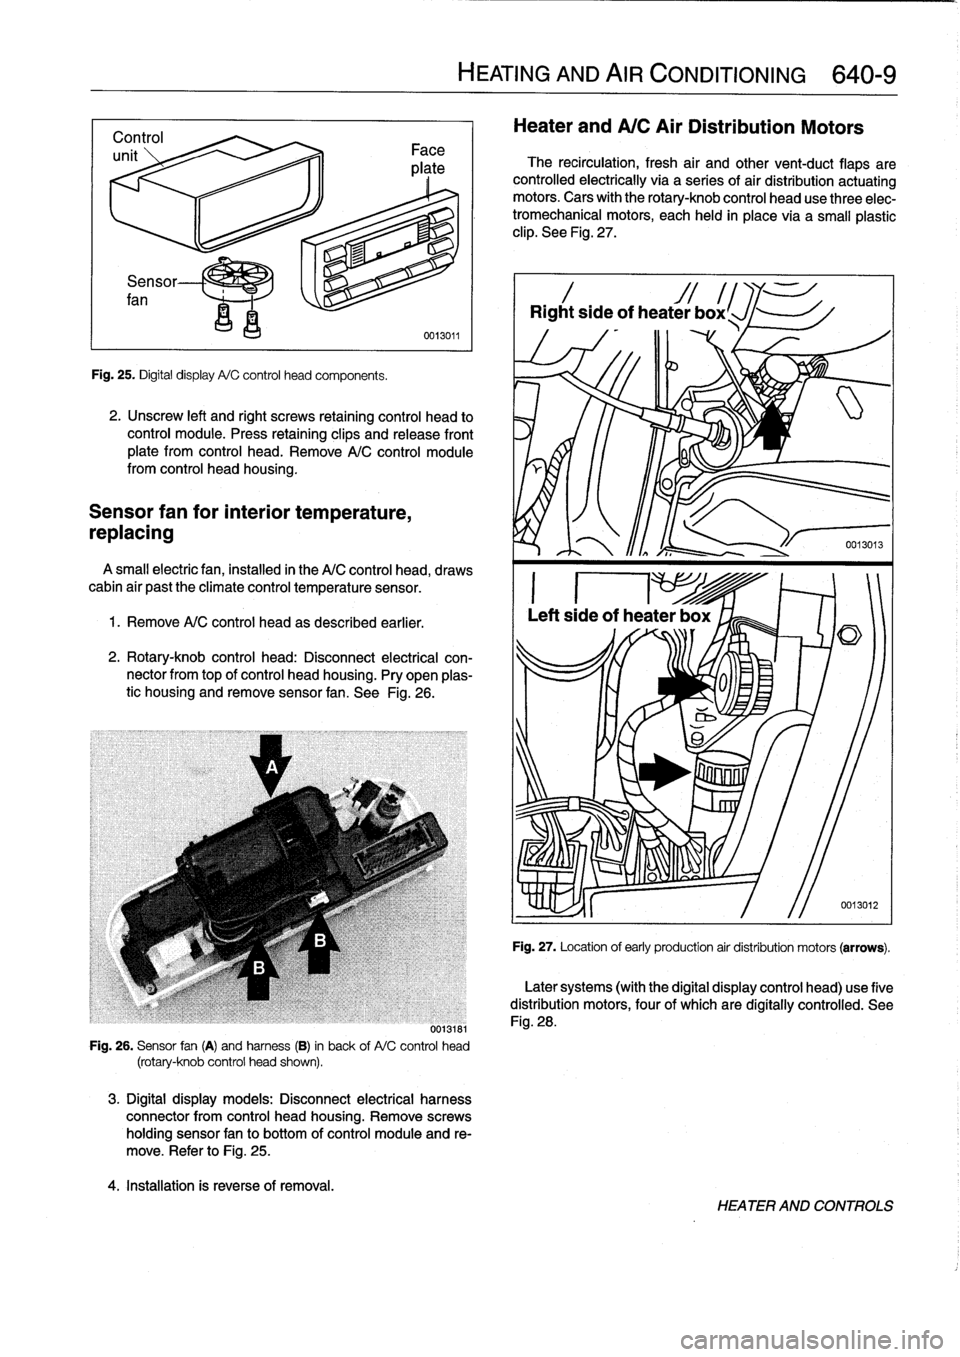 BMW 323i 1993 E36 Workshop Manual 
Sensor

fan

Fig
.
25
.
Digital
display
A/C
control
head
components
.

2
.
Unscrew
left
and
right
screws
retaining
control
head
to
control
module
.
Press
retaining
clips
and
release
front
plate
from
